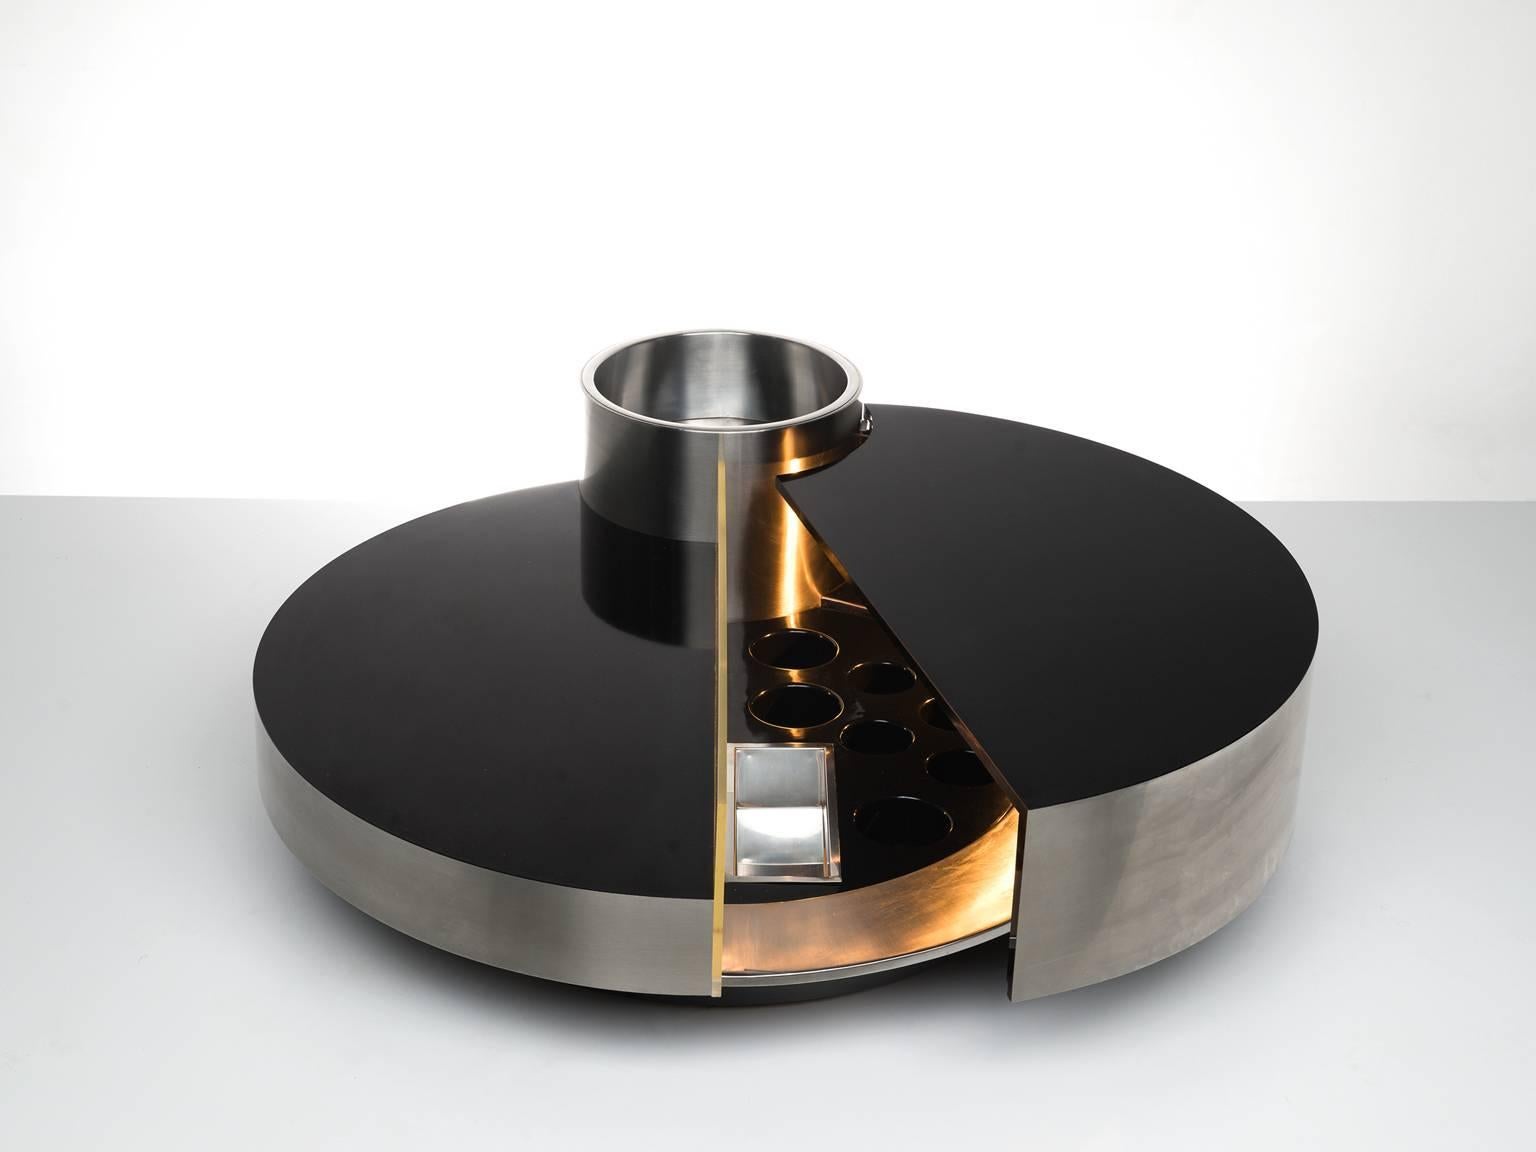 Steel Massimo Papiri for Mario Sabot Cocktail Table with Dry Bar